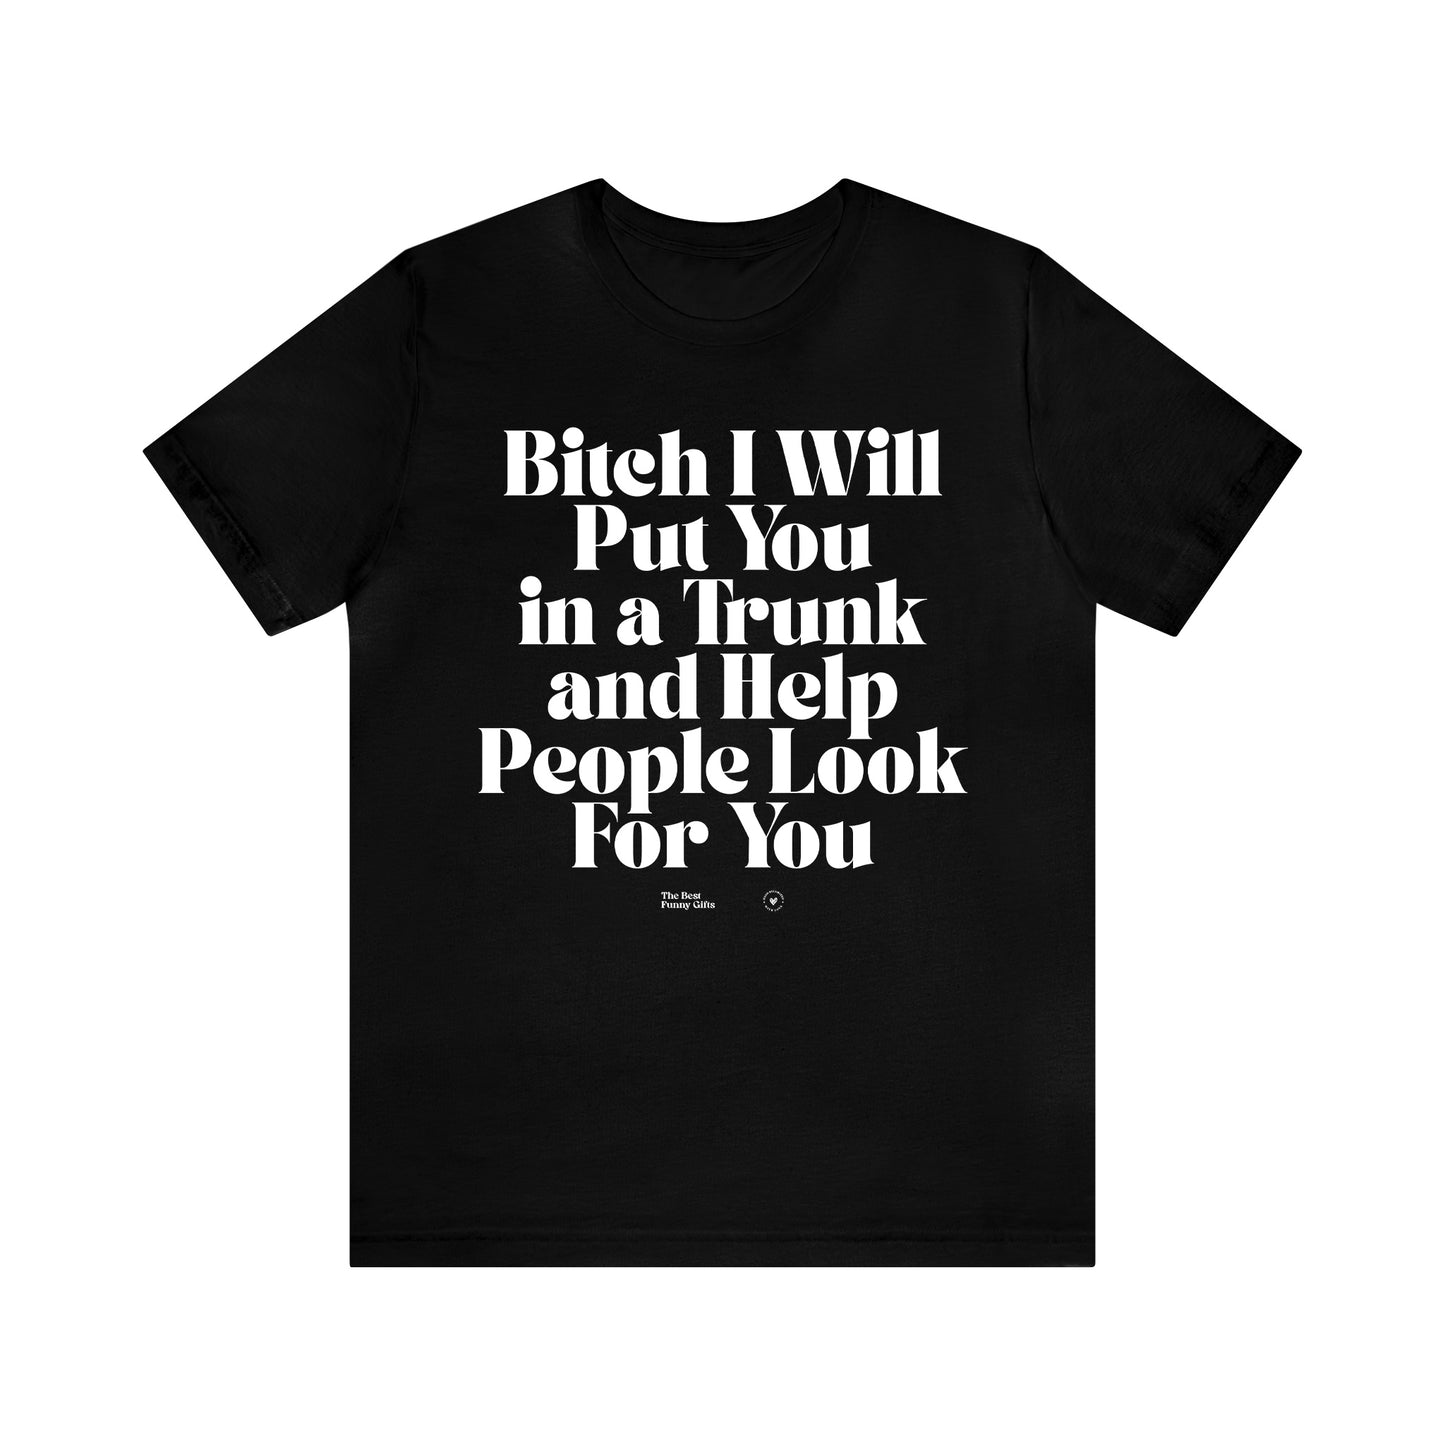 Funny Shirts for Women - Bitch I Will Put You in a Trunk and Help People Look for You - Women’s T Shirts